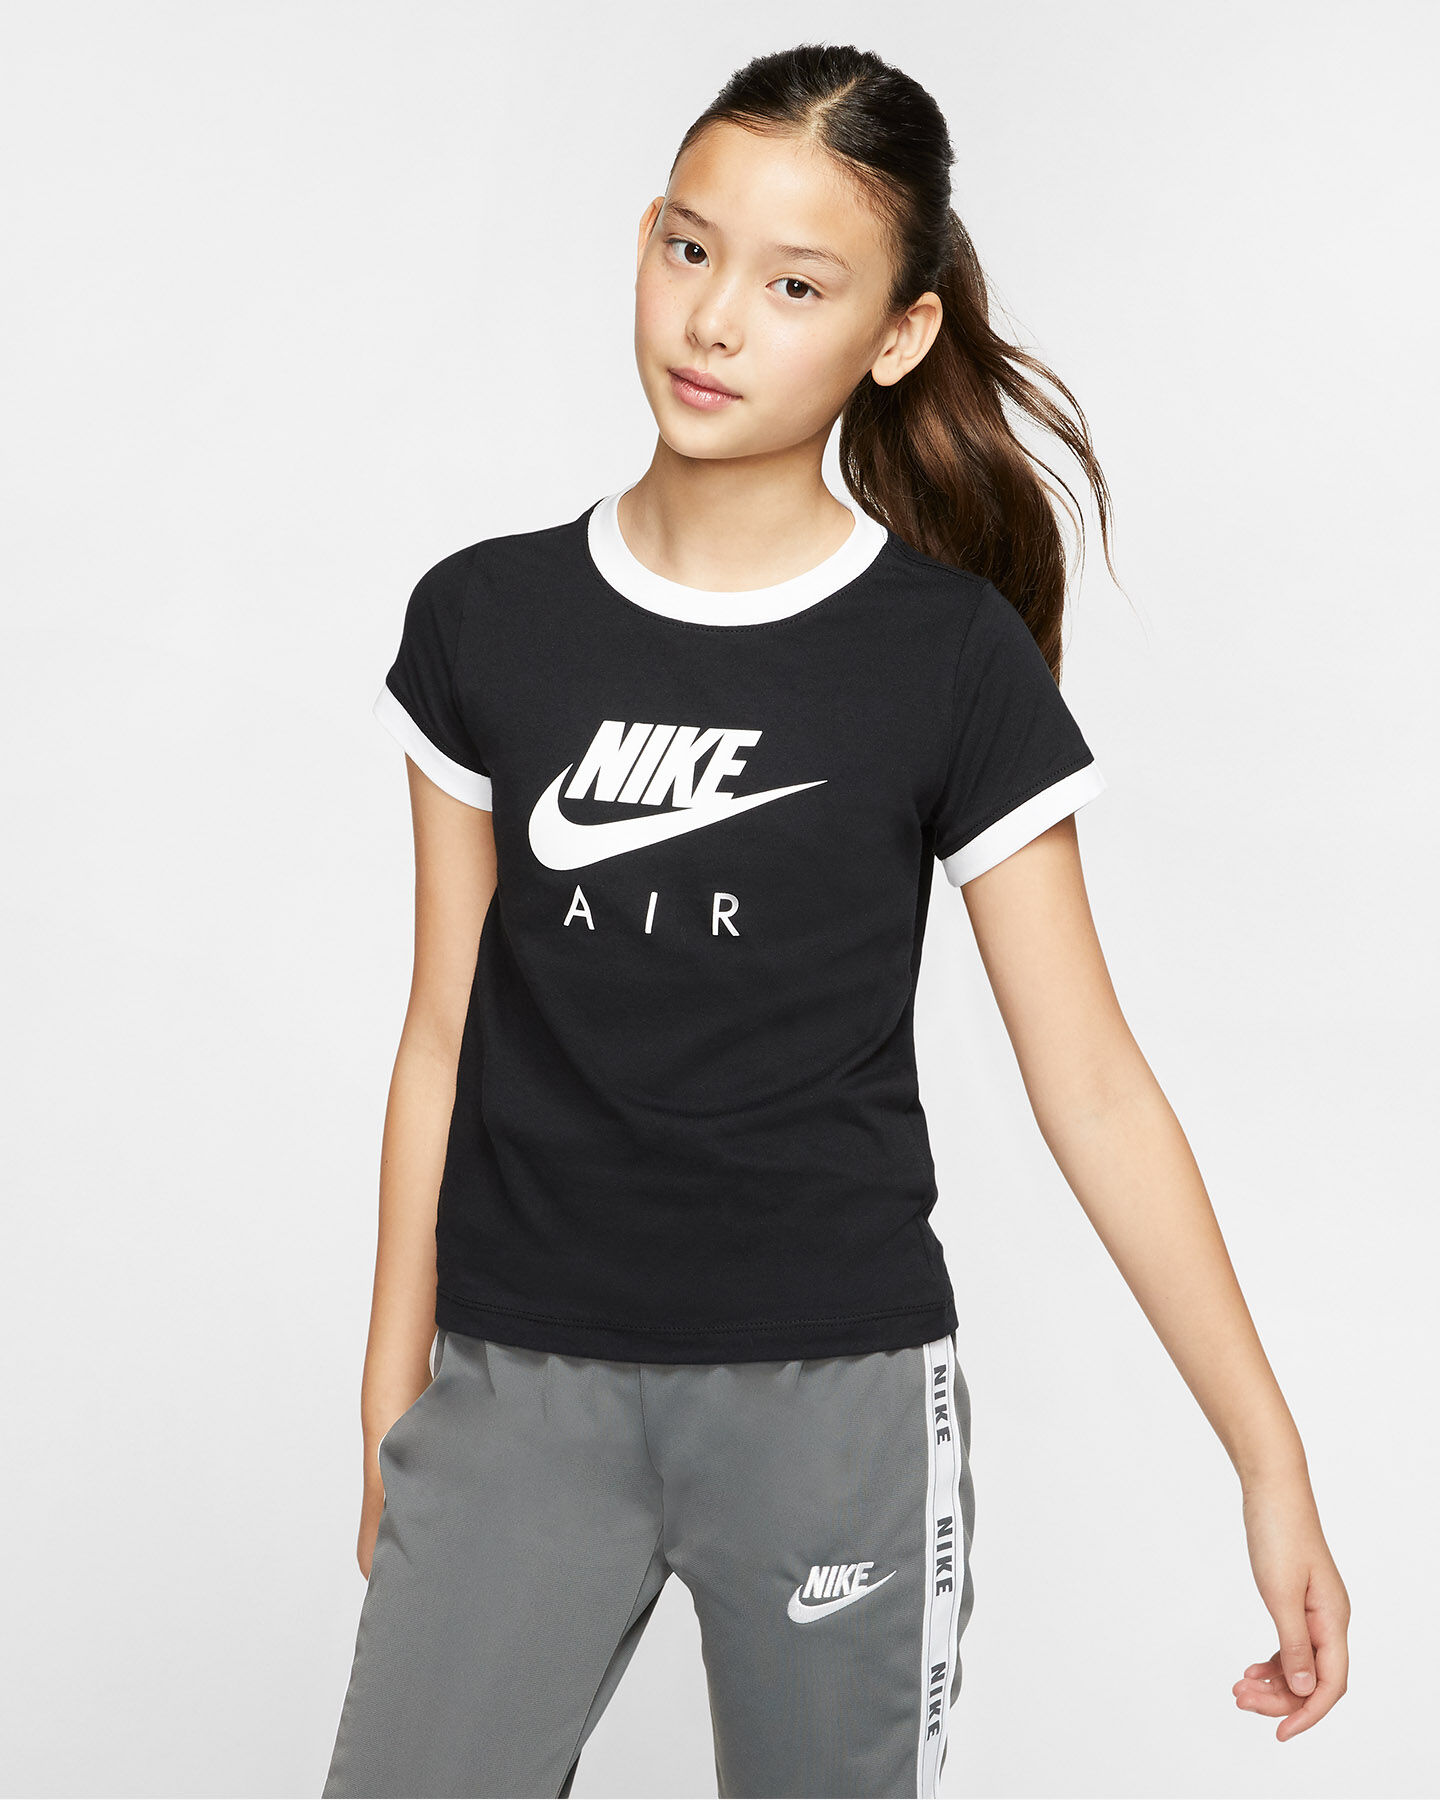  T-Shirt NIKE AIR JR S5163912|011|S scatto 2